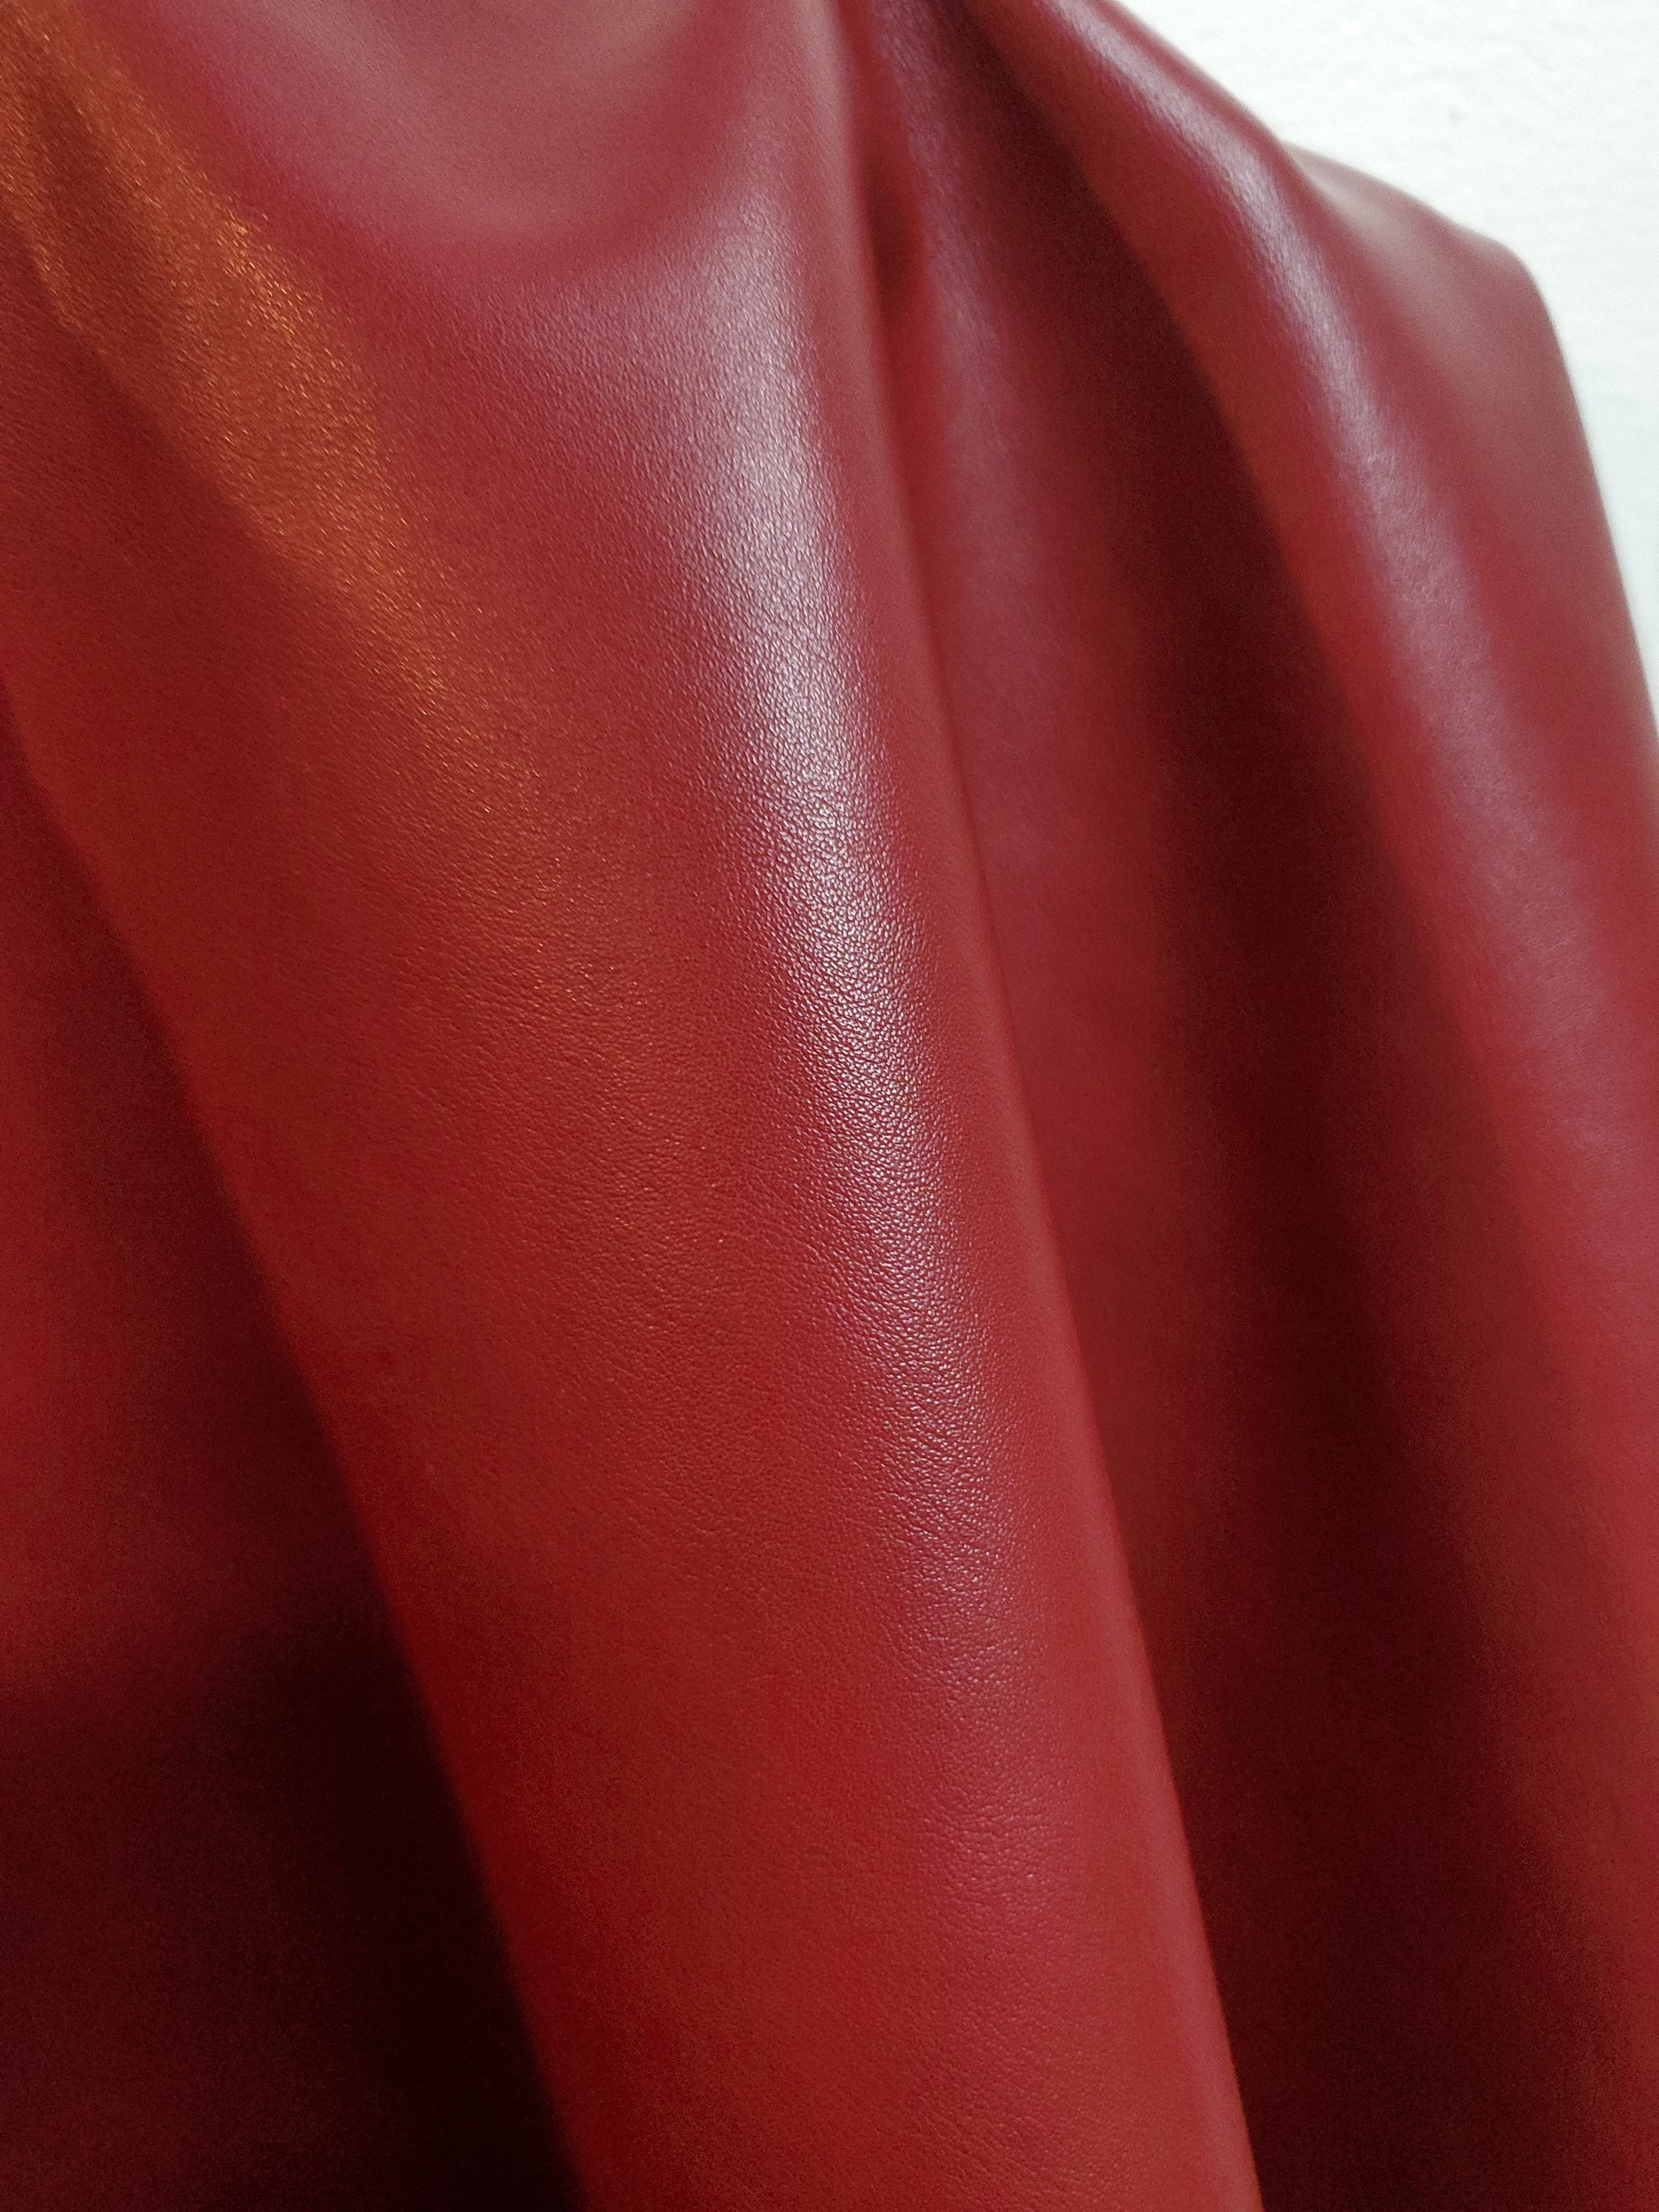  Faux vegan leather by the yard sheets distressed leather fabric for upholstery 30,000 Double Rubs vinyl sheets nappa leather crafts bookbinding books furniture fabrics uphilstery fuax material pu pleather faiux learher cruelty free nappa seat burgundy red